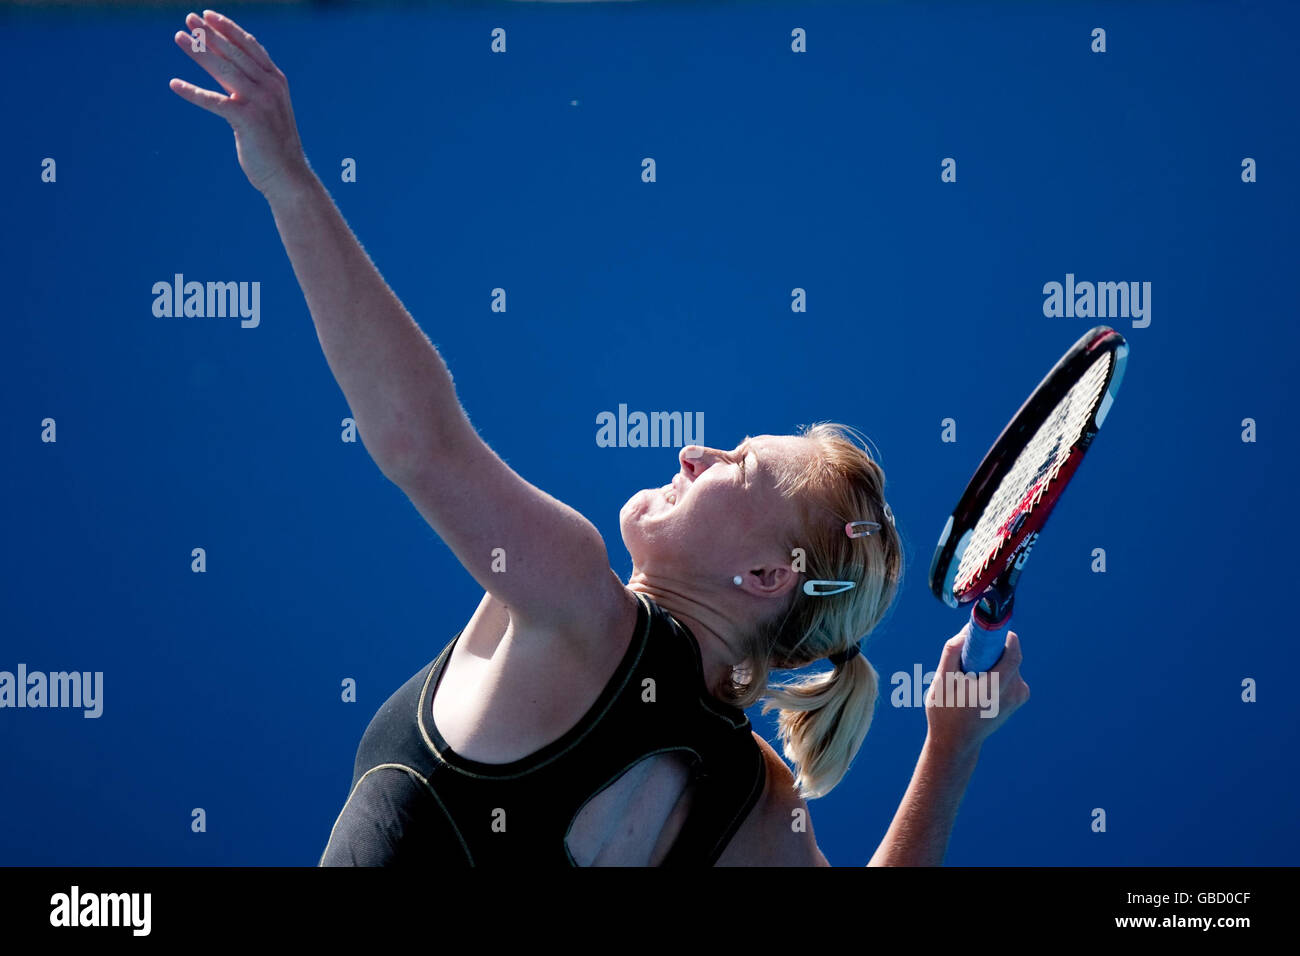 Great Britain's Elena Baltacha in action against Germany's Anna-Lena Groenefeld during the Australian Open 2009 at Melbourne Park, Melbourne, Australia. Stock Photo